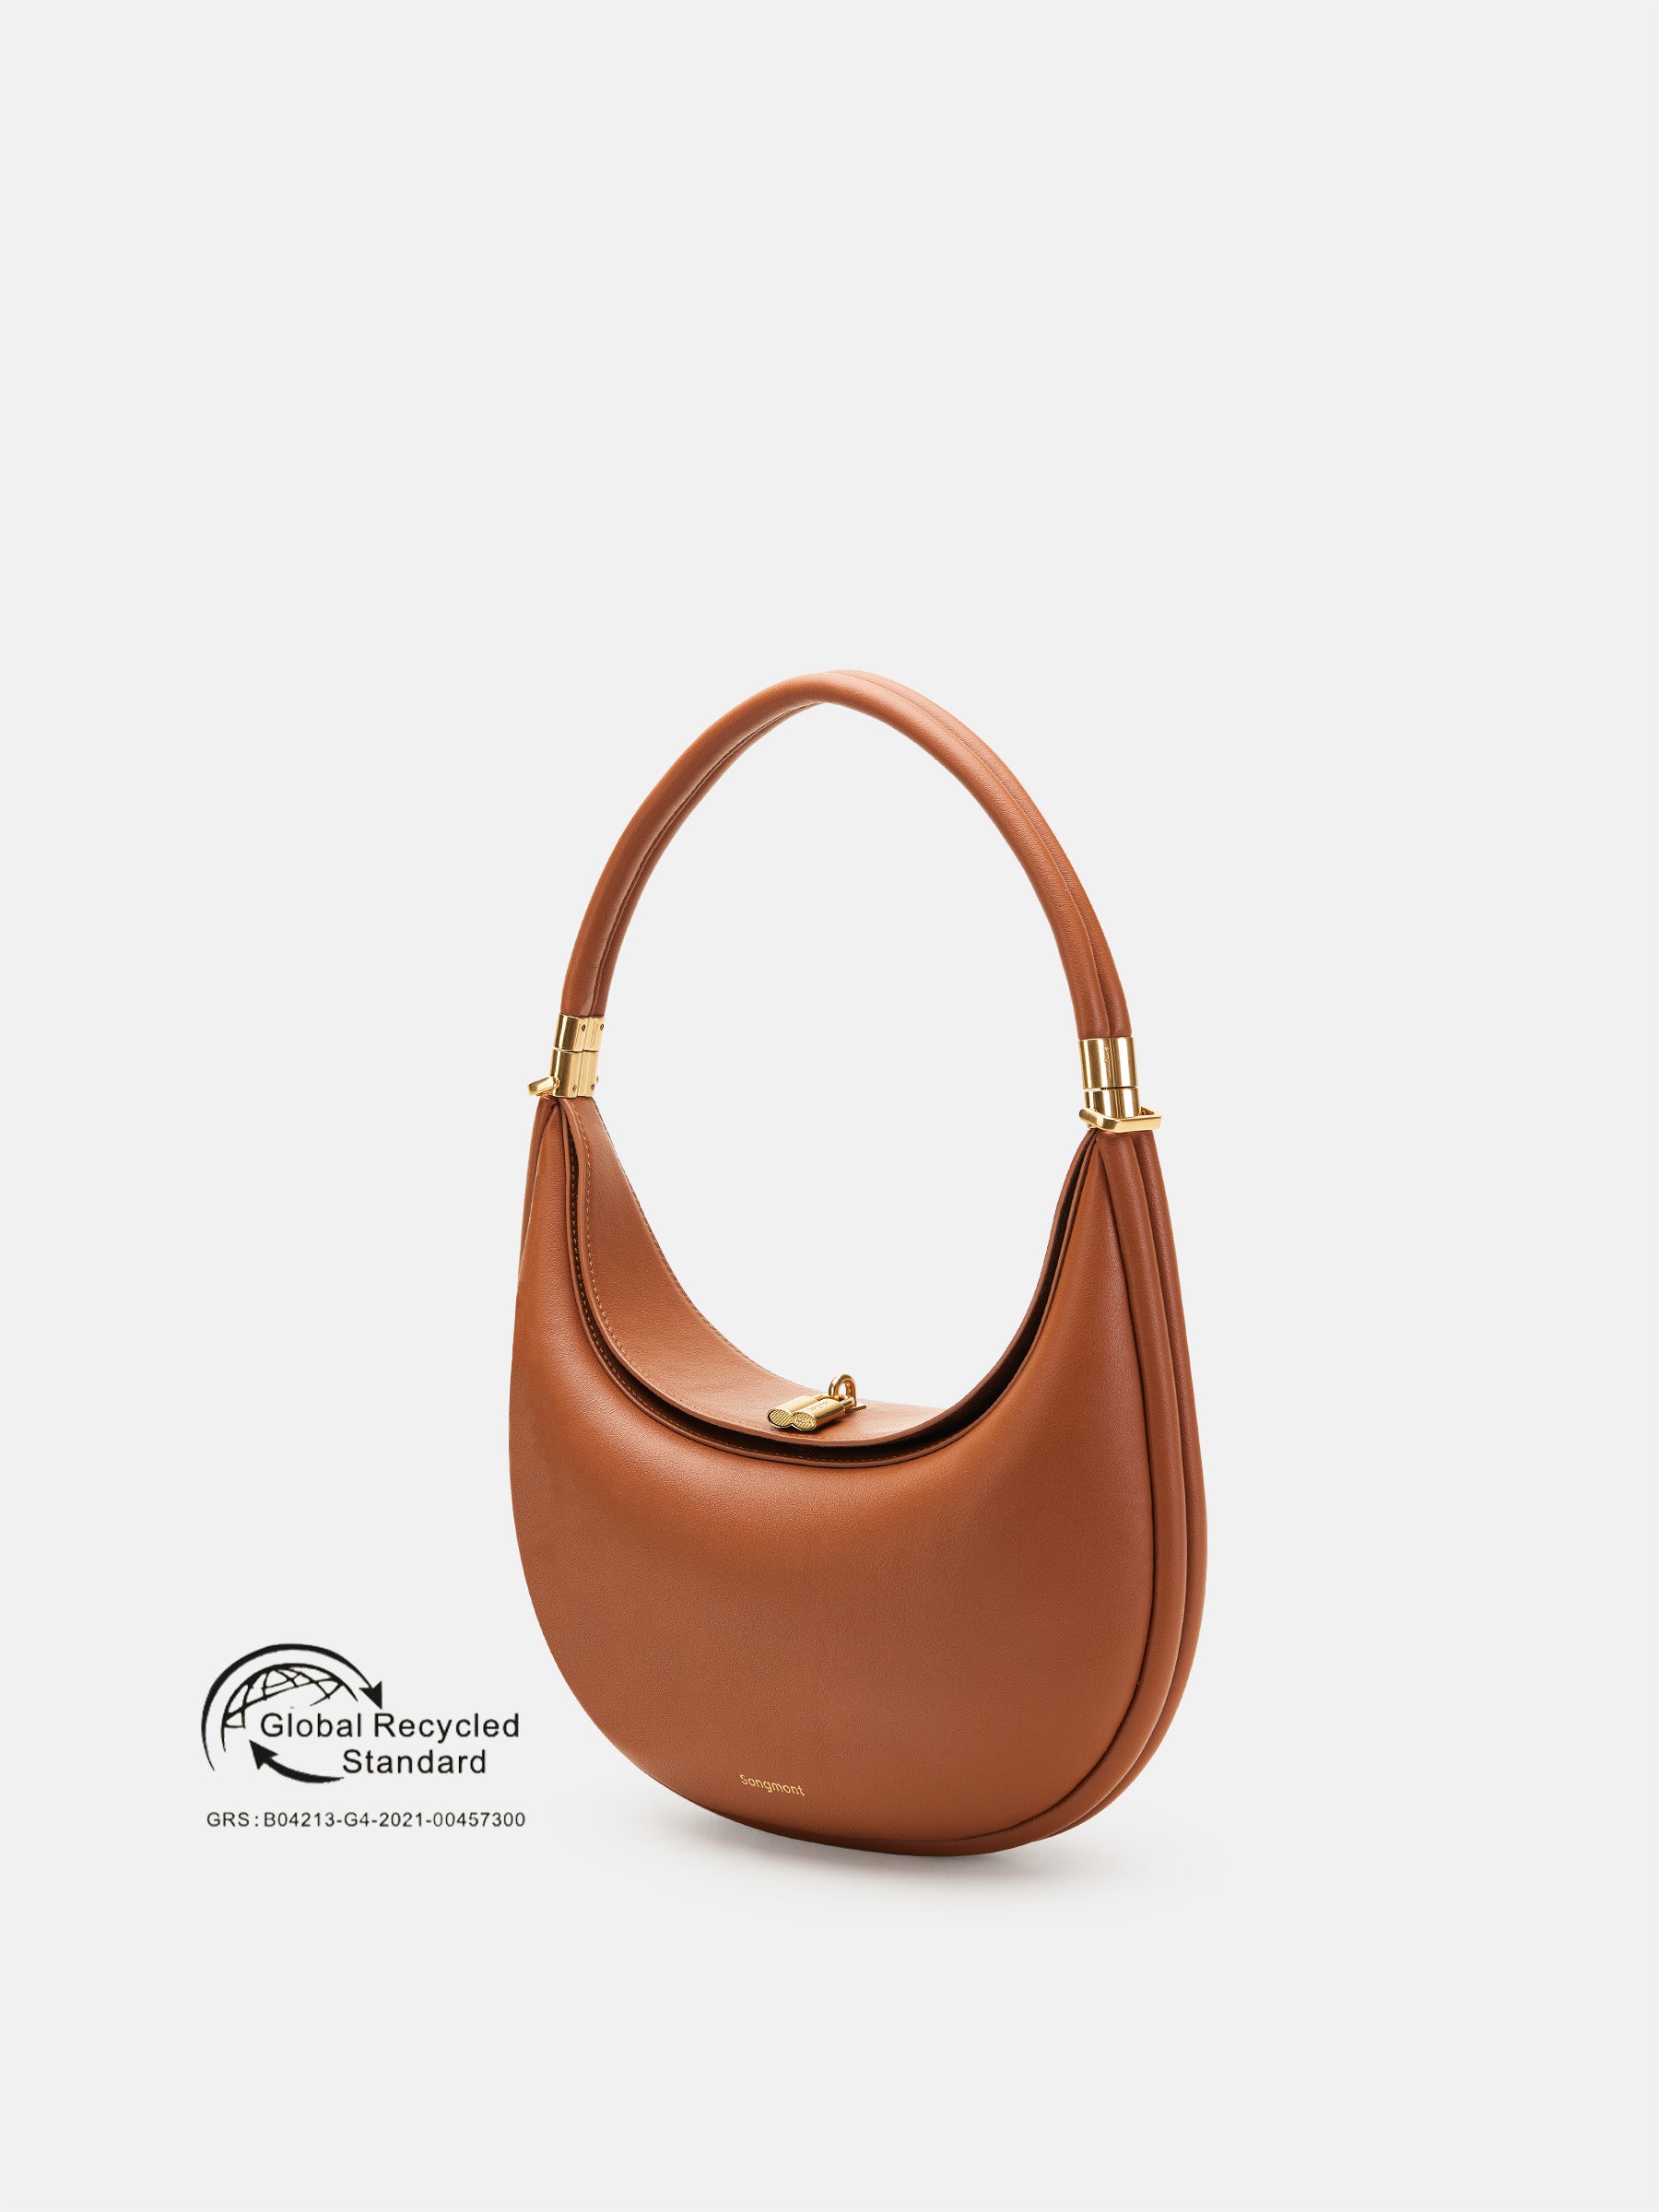 Recycled Leather Luna Bags, Eco Friendly Handbags